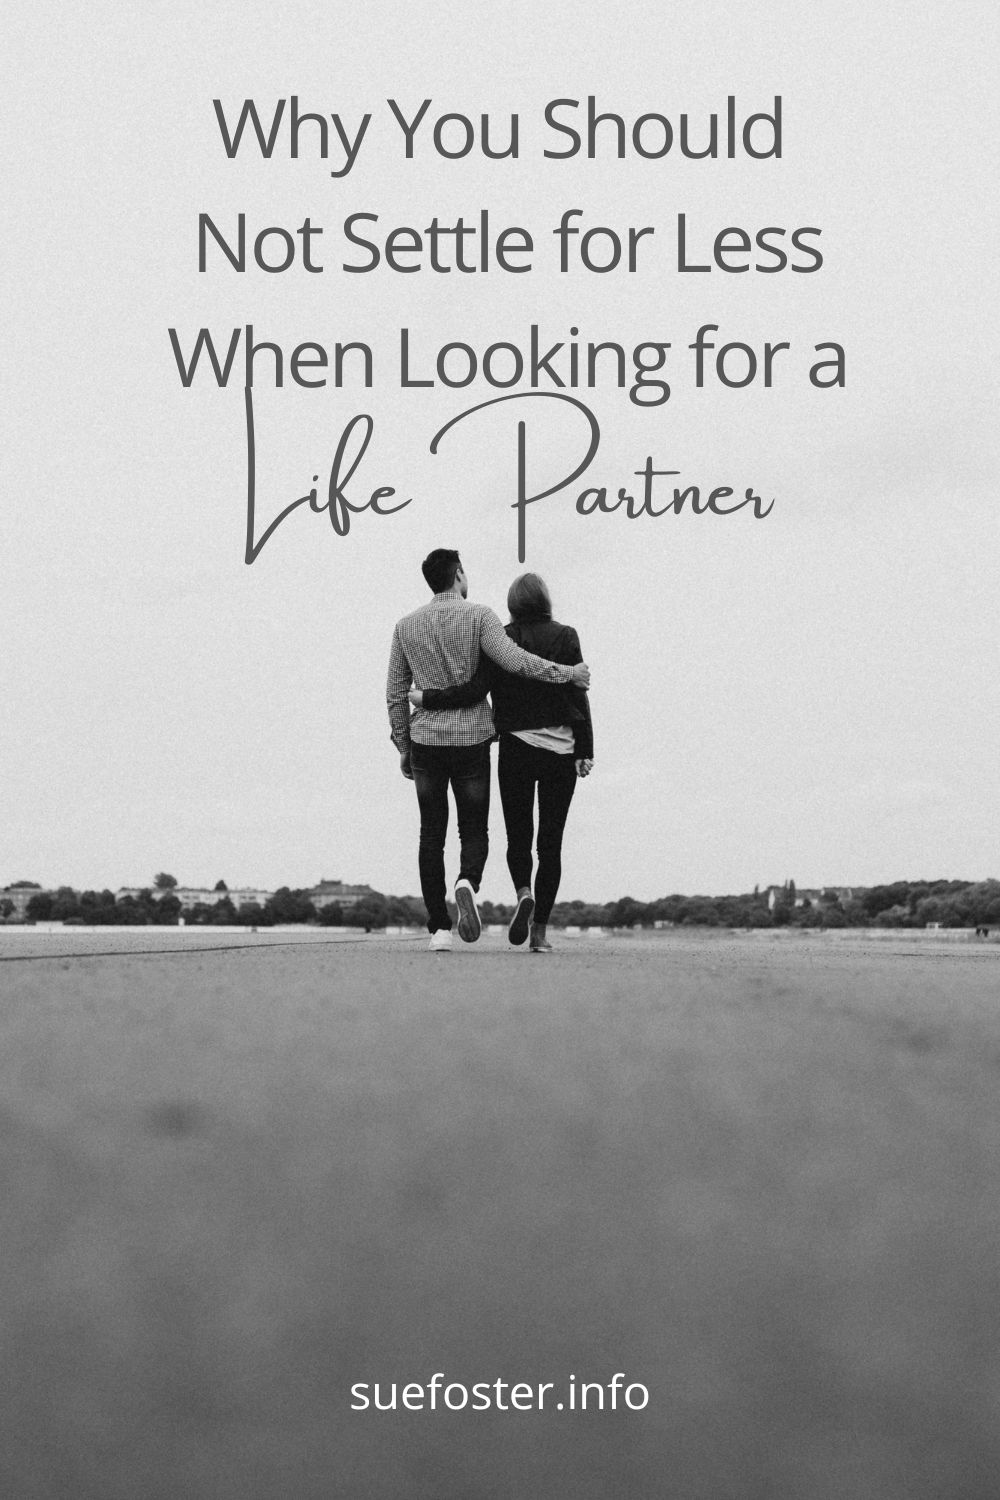 The Importance of Investing in Finding a Lifetime Partner.